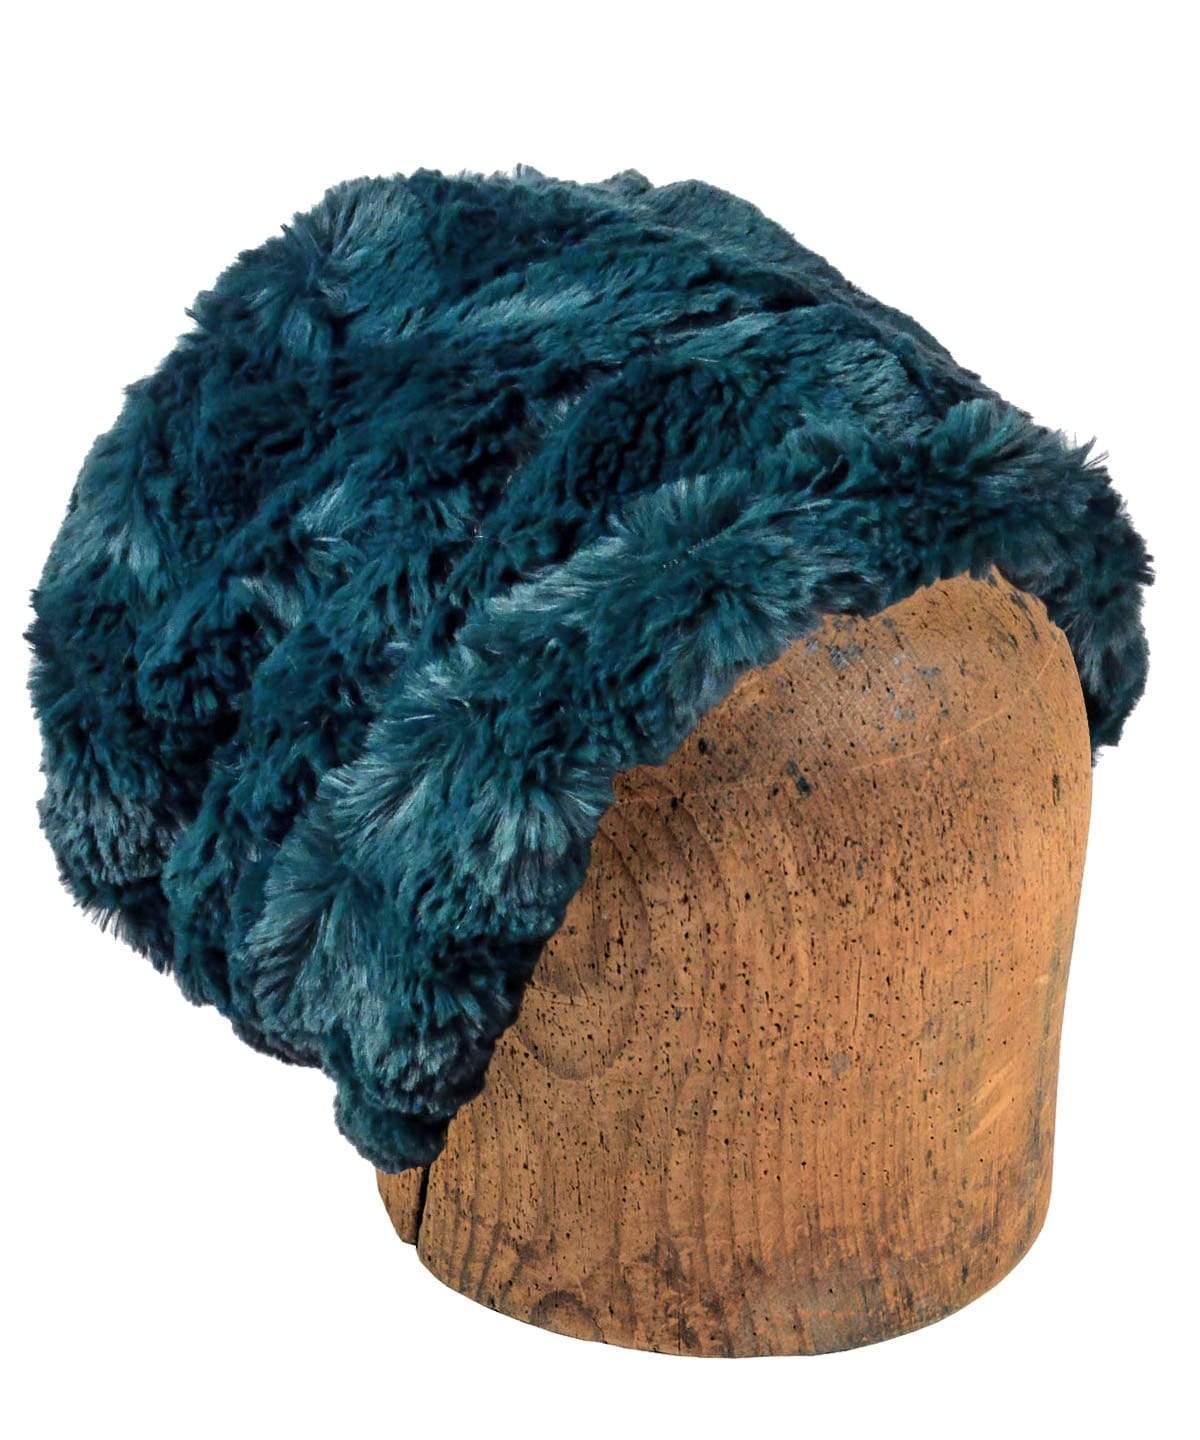 Hats - Pandemonium Millinery Faux Fur Boutique made in Seattle WA USA